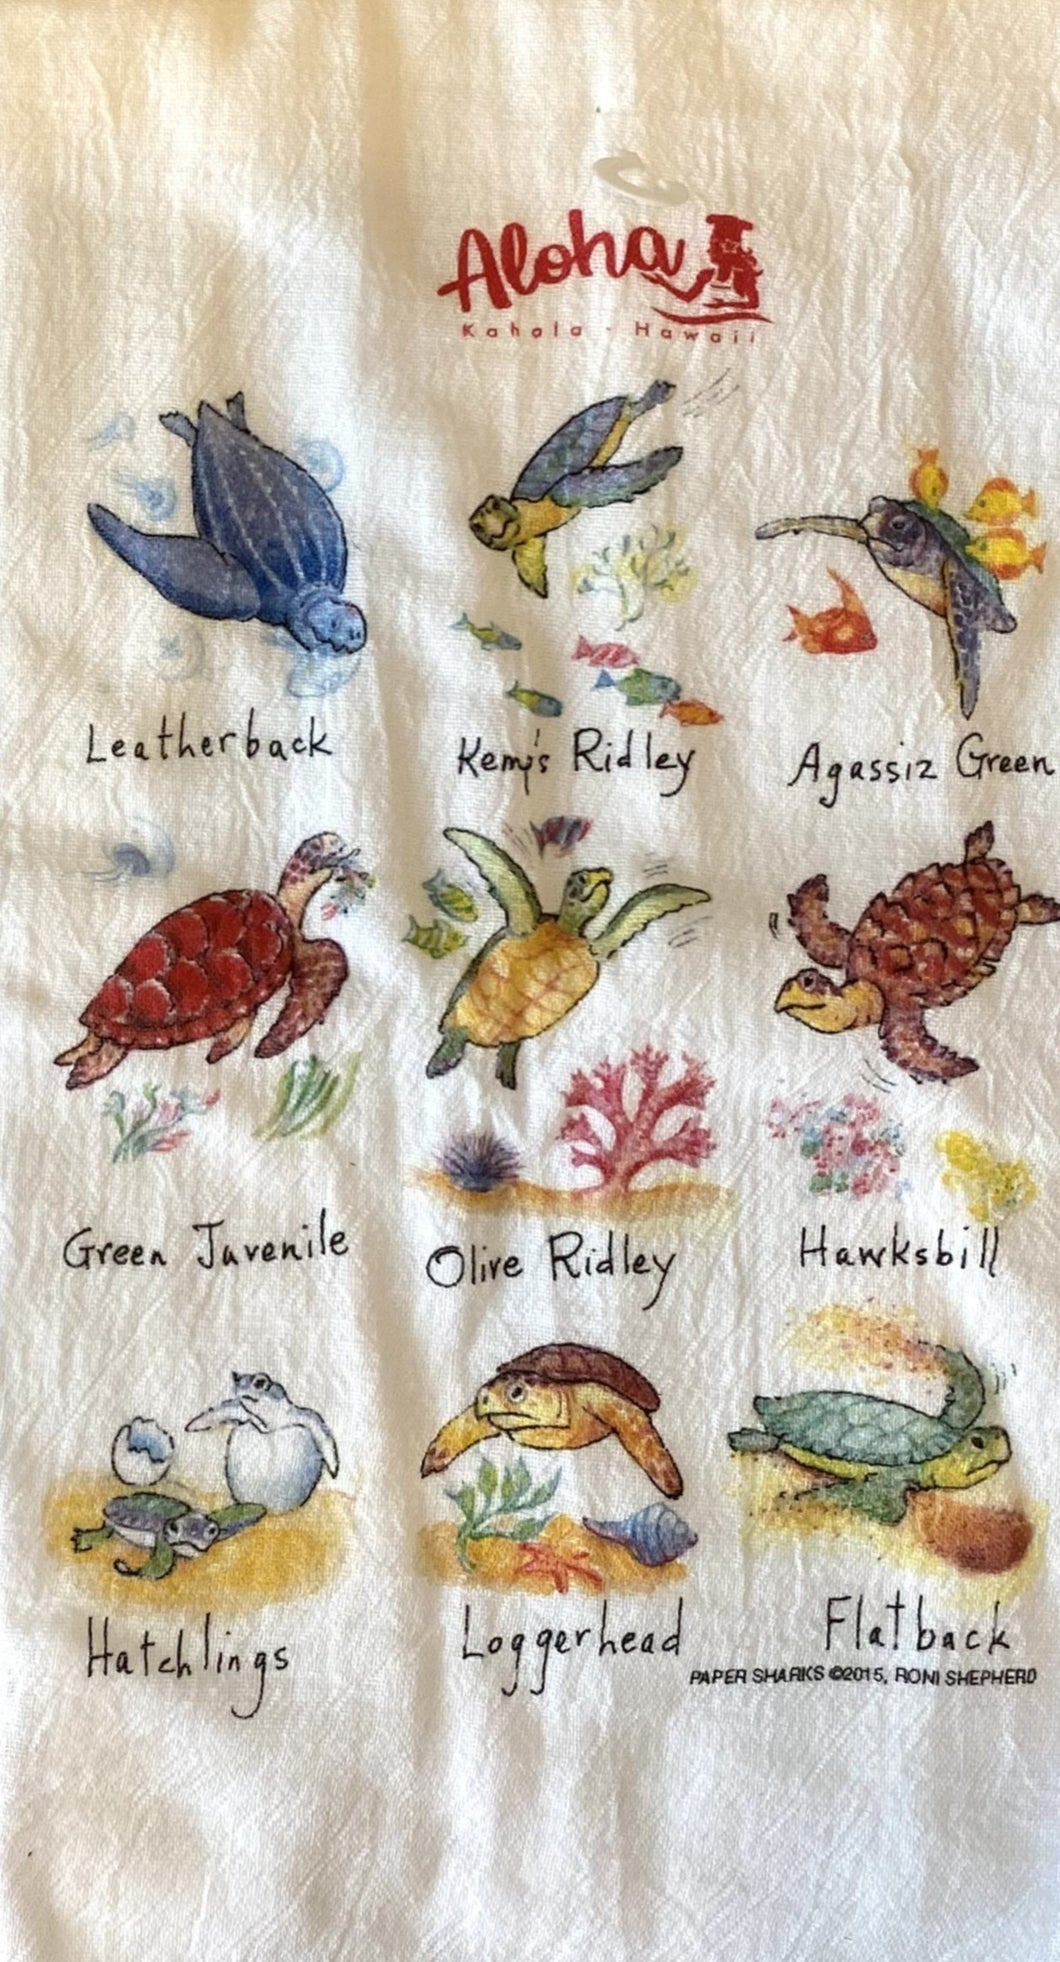 From Hawaii キッチンタオル（The Flour Sack Towel）